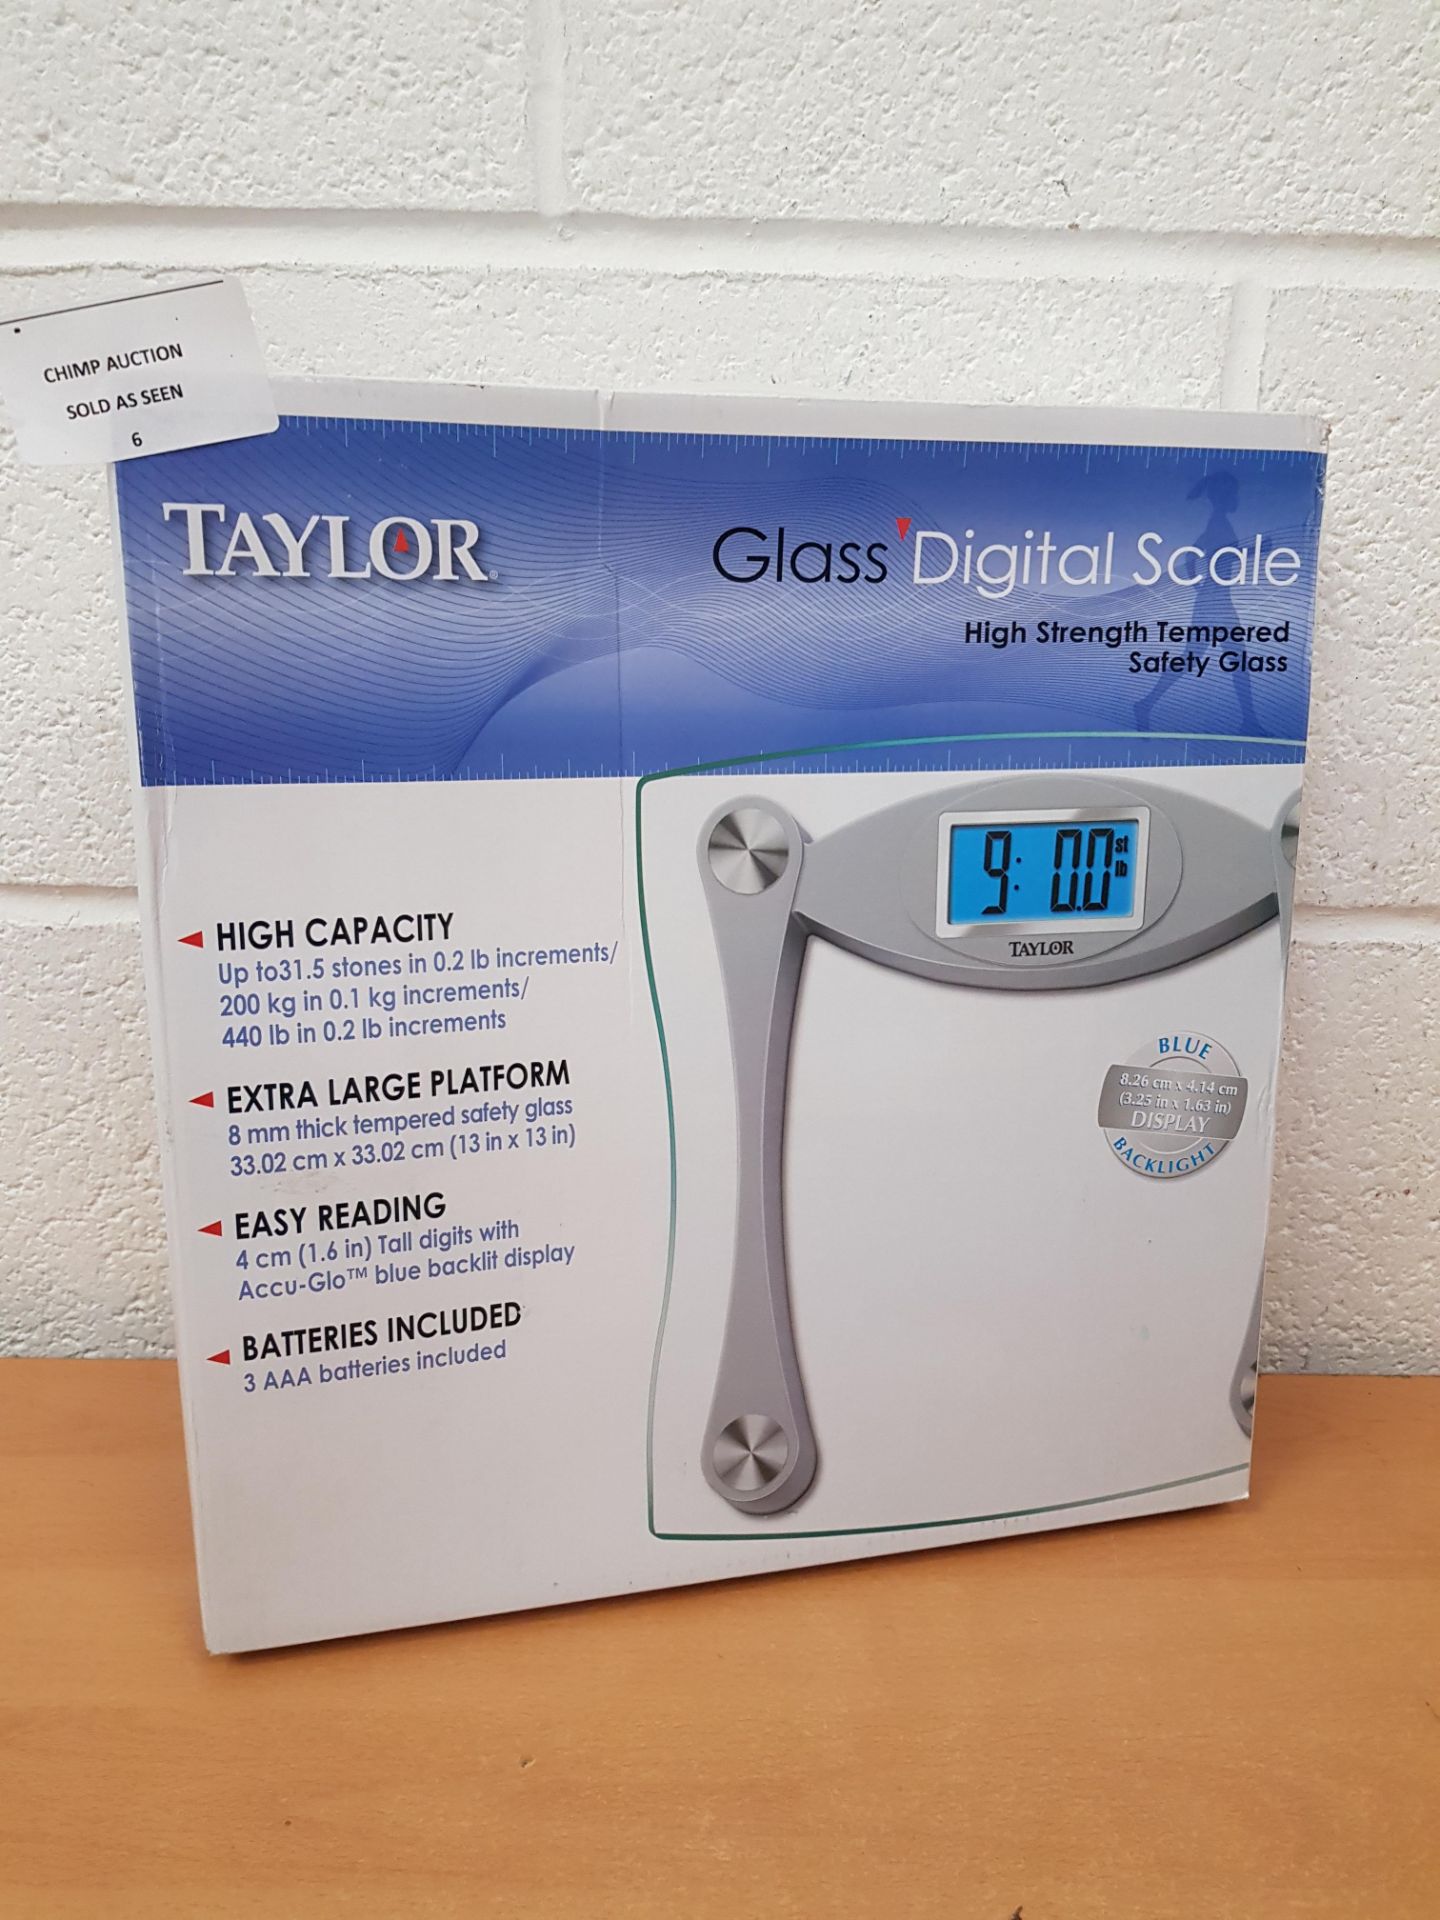 Brand new Taylor Glass Digital Scale RRP £49.99.